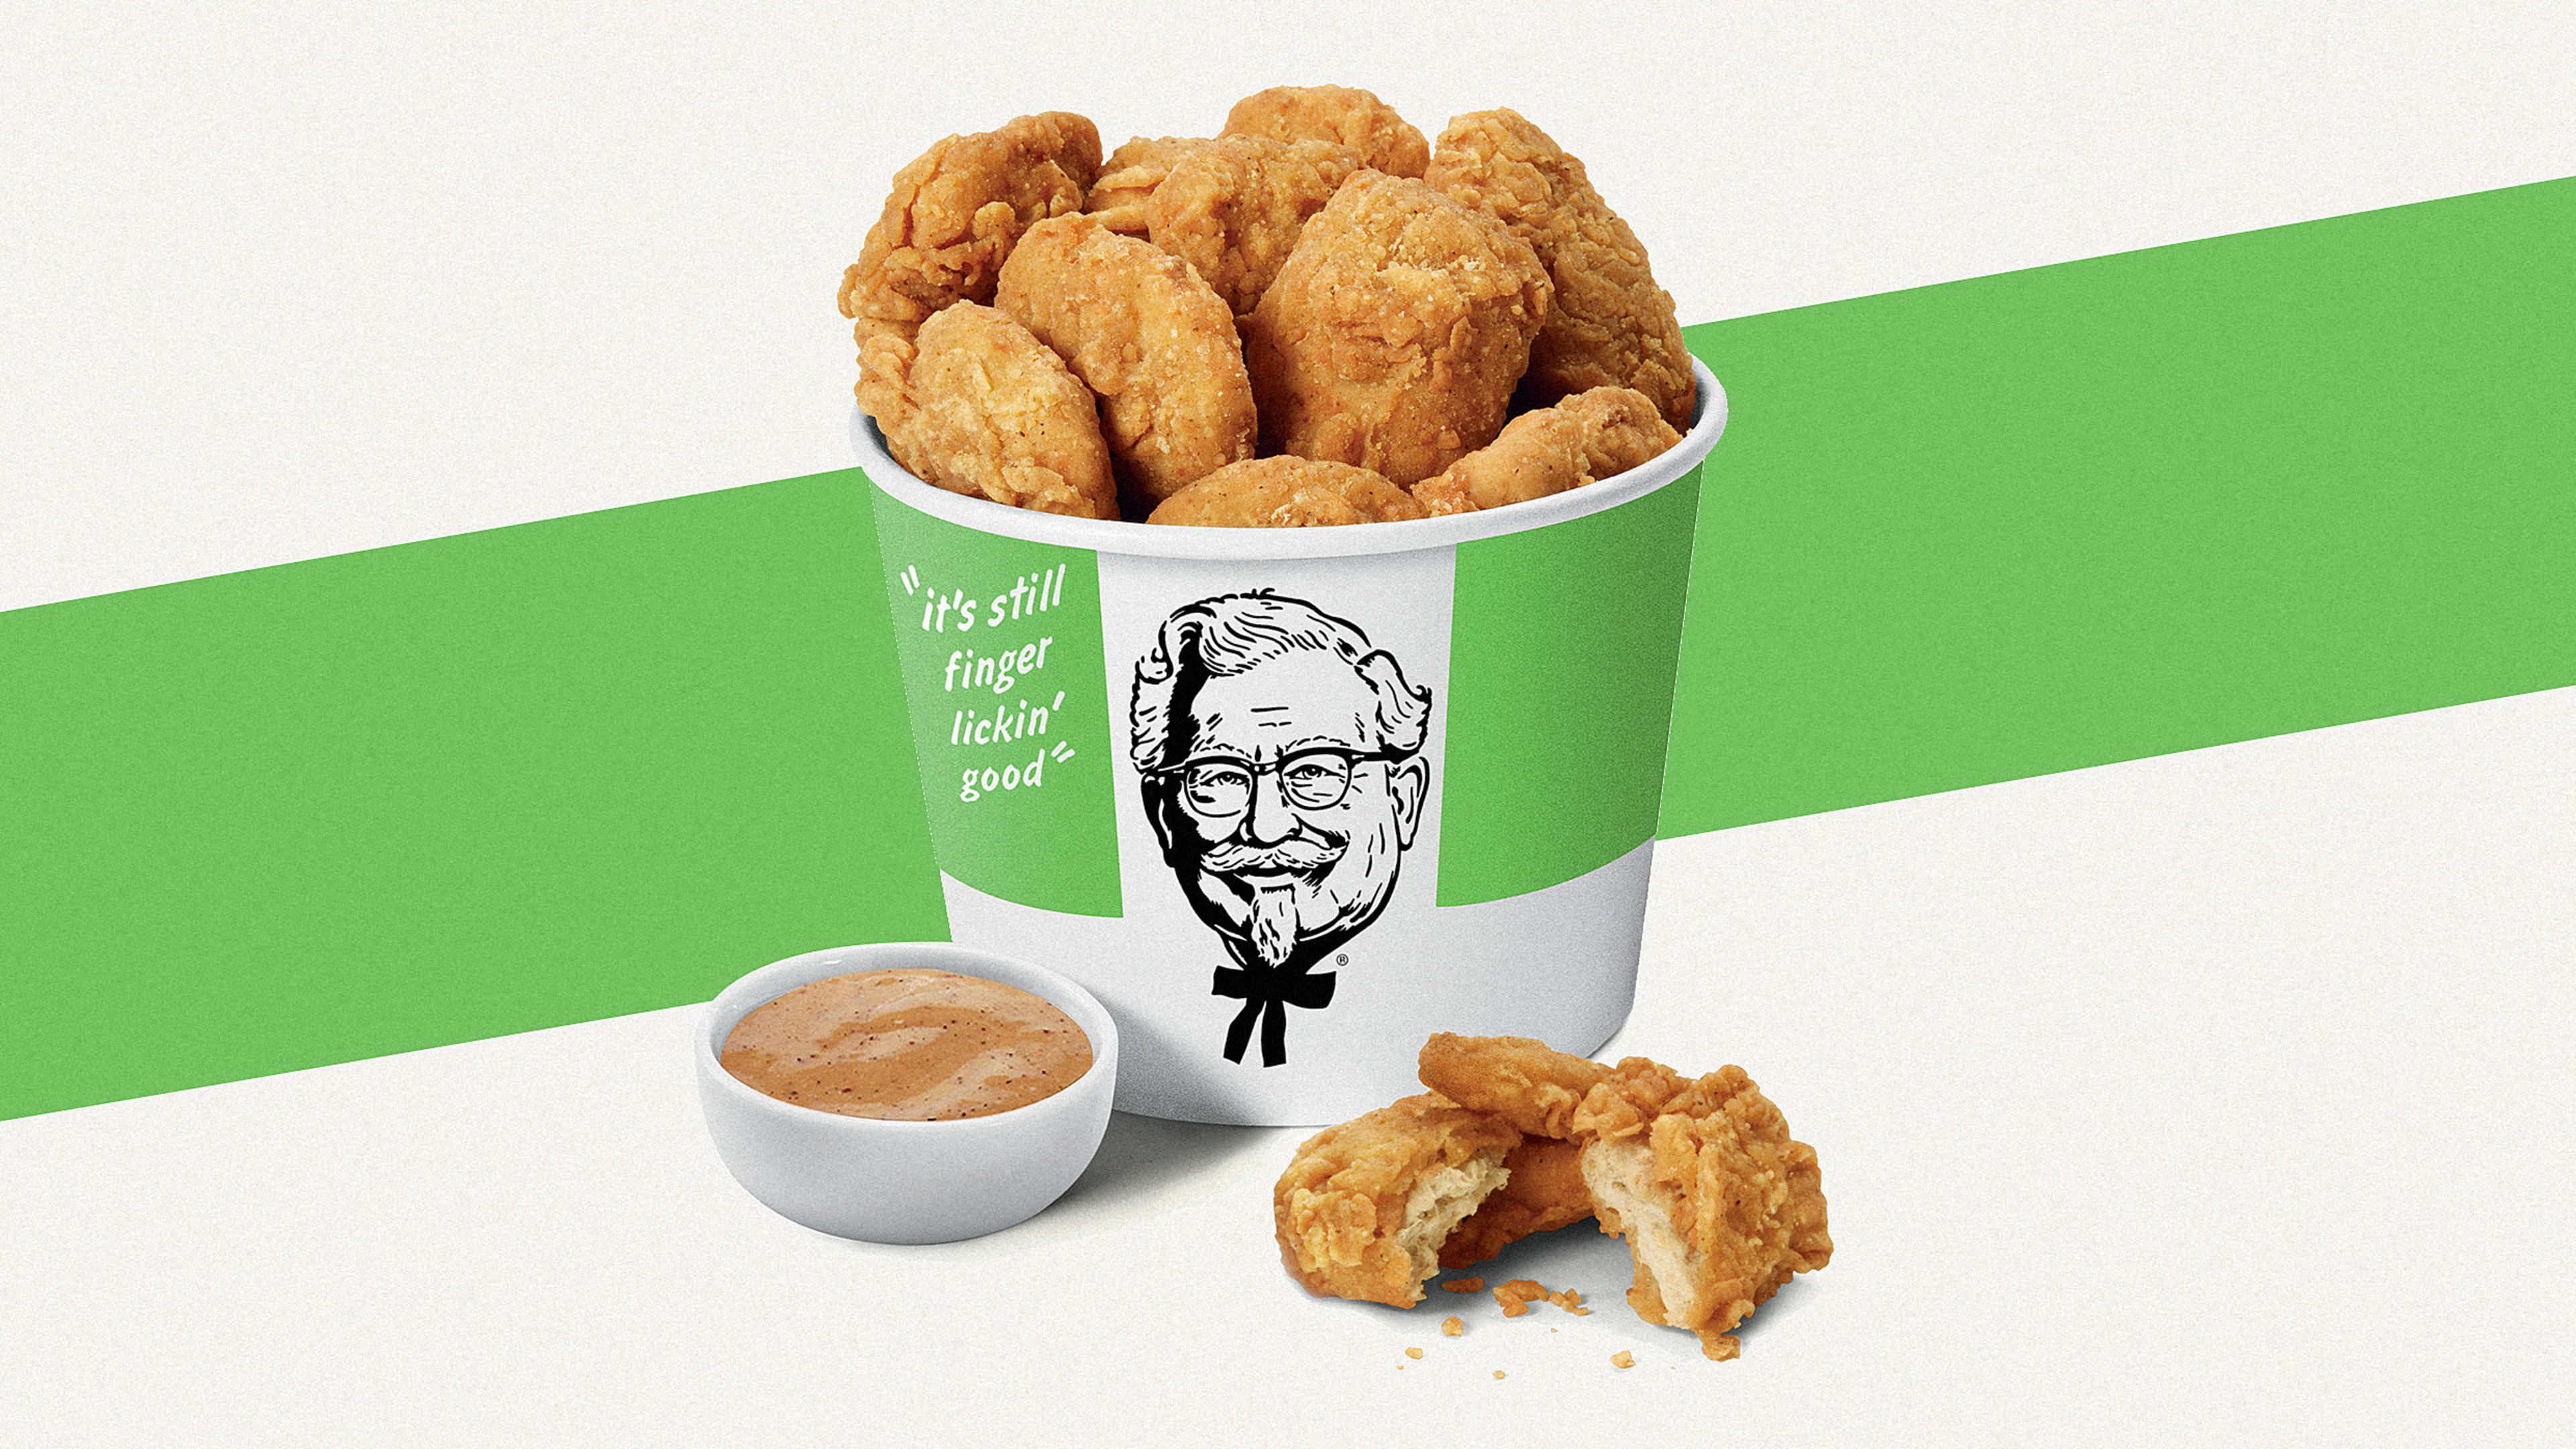 KFC is going to sell plant-based fried chicken